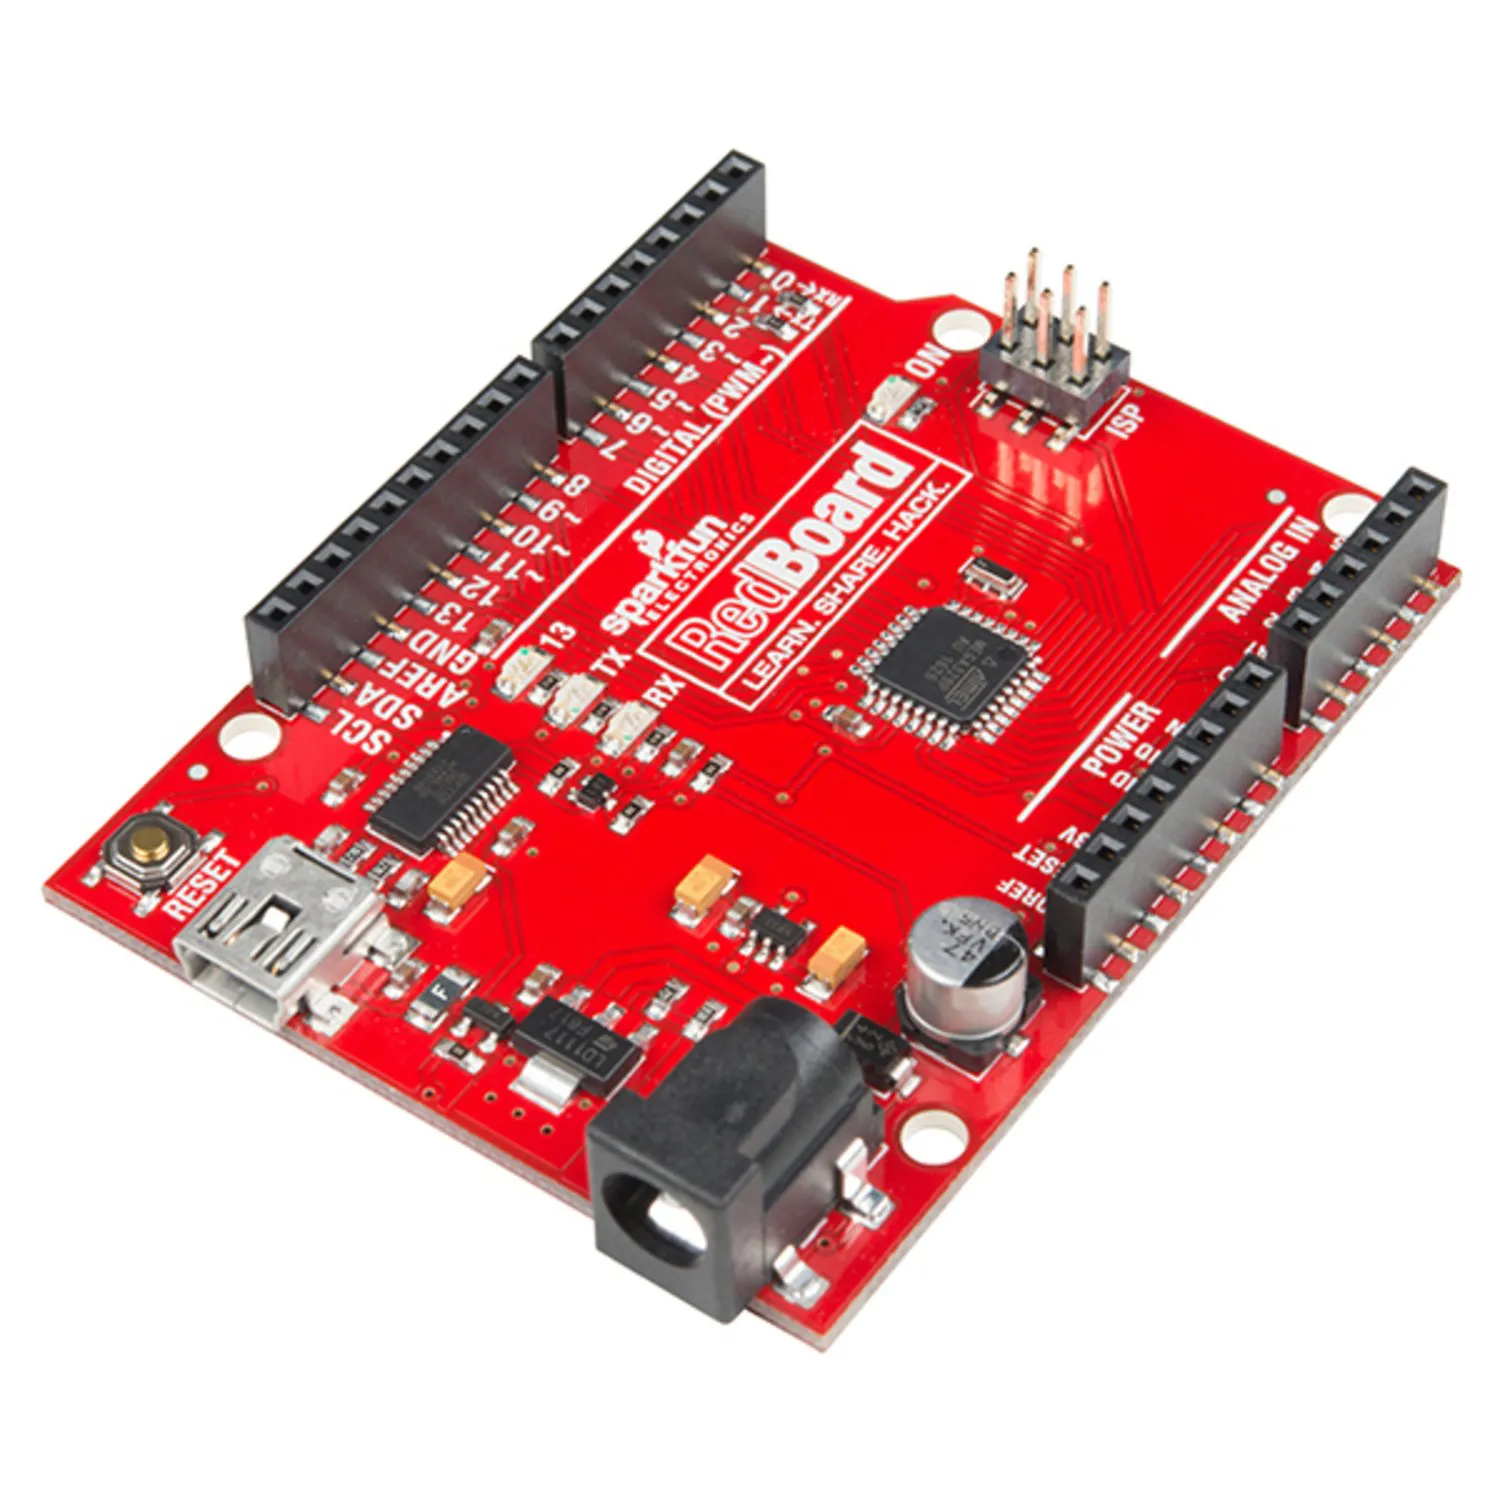 Photo of SparkFun RedBoard - Programmed with Arduino